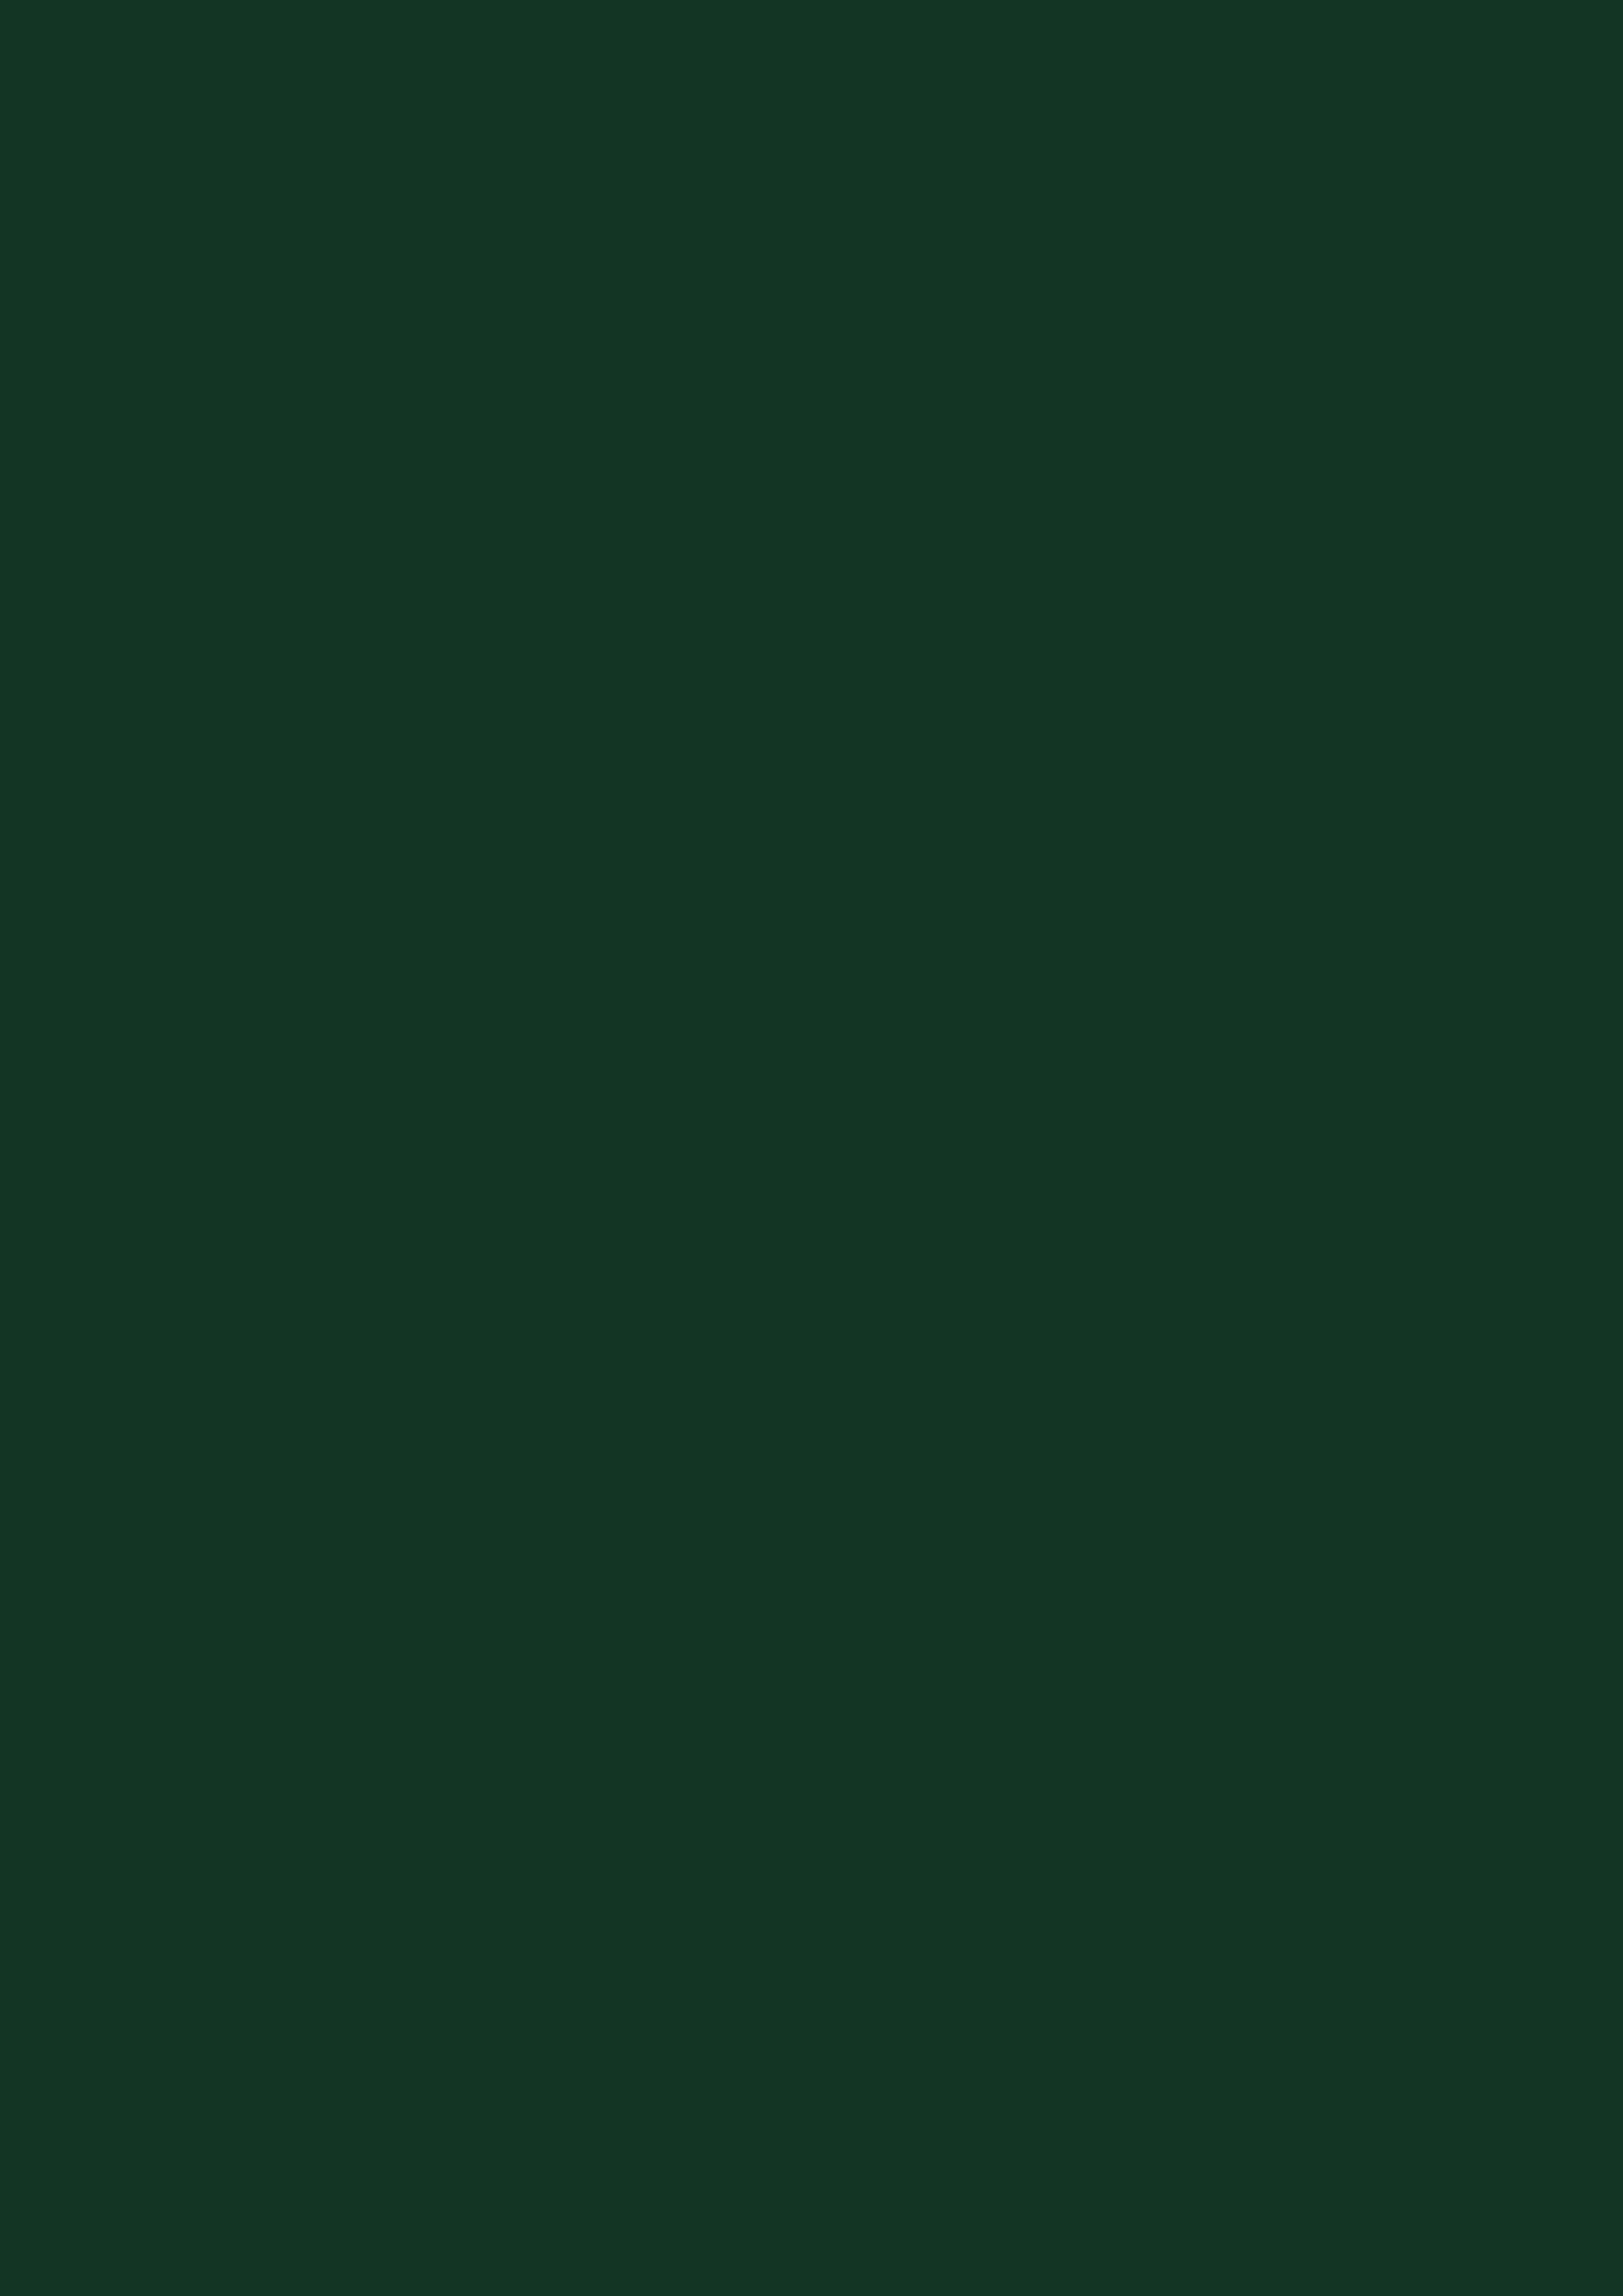 2480x3508 Phthalo Green Solid Color Background